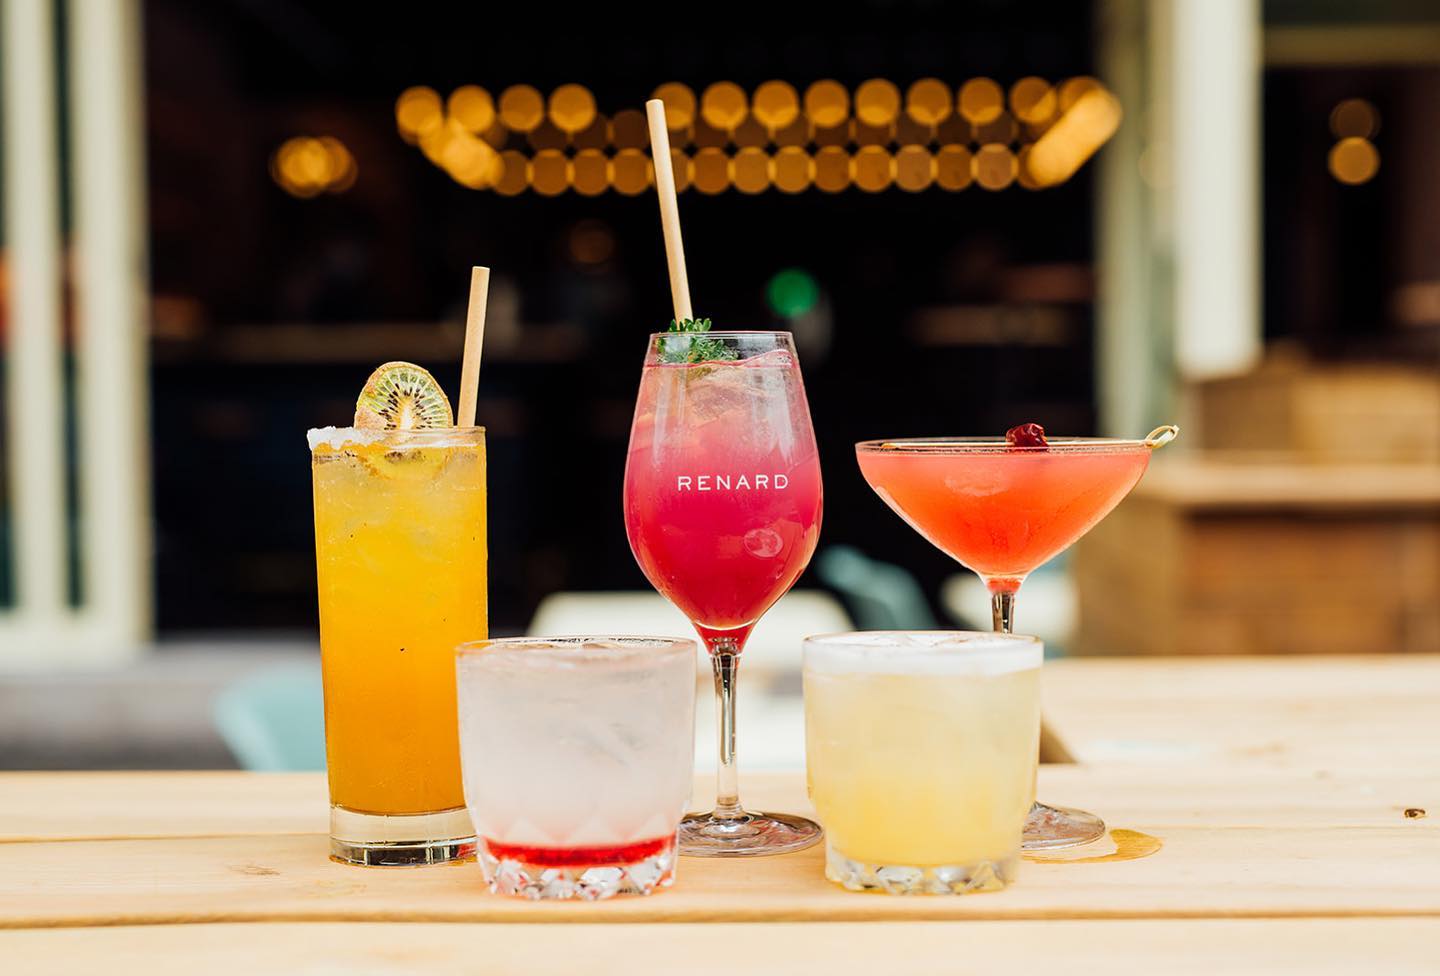 Five cocktails, including a pink one in the middle.